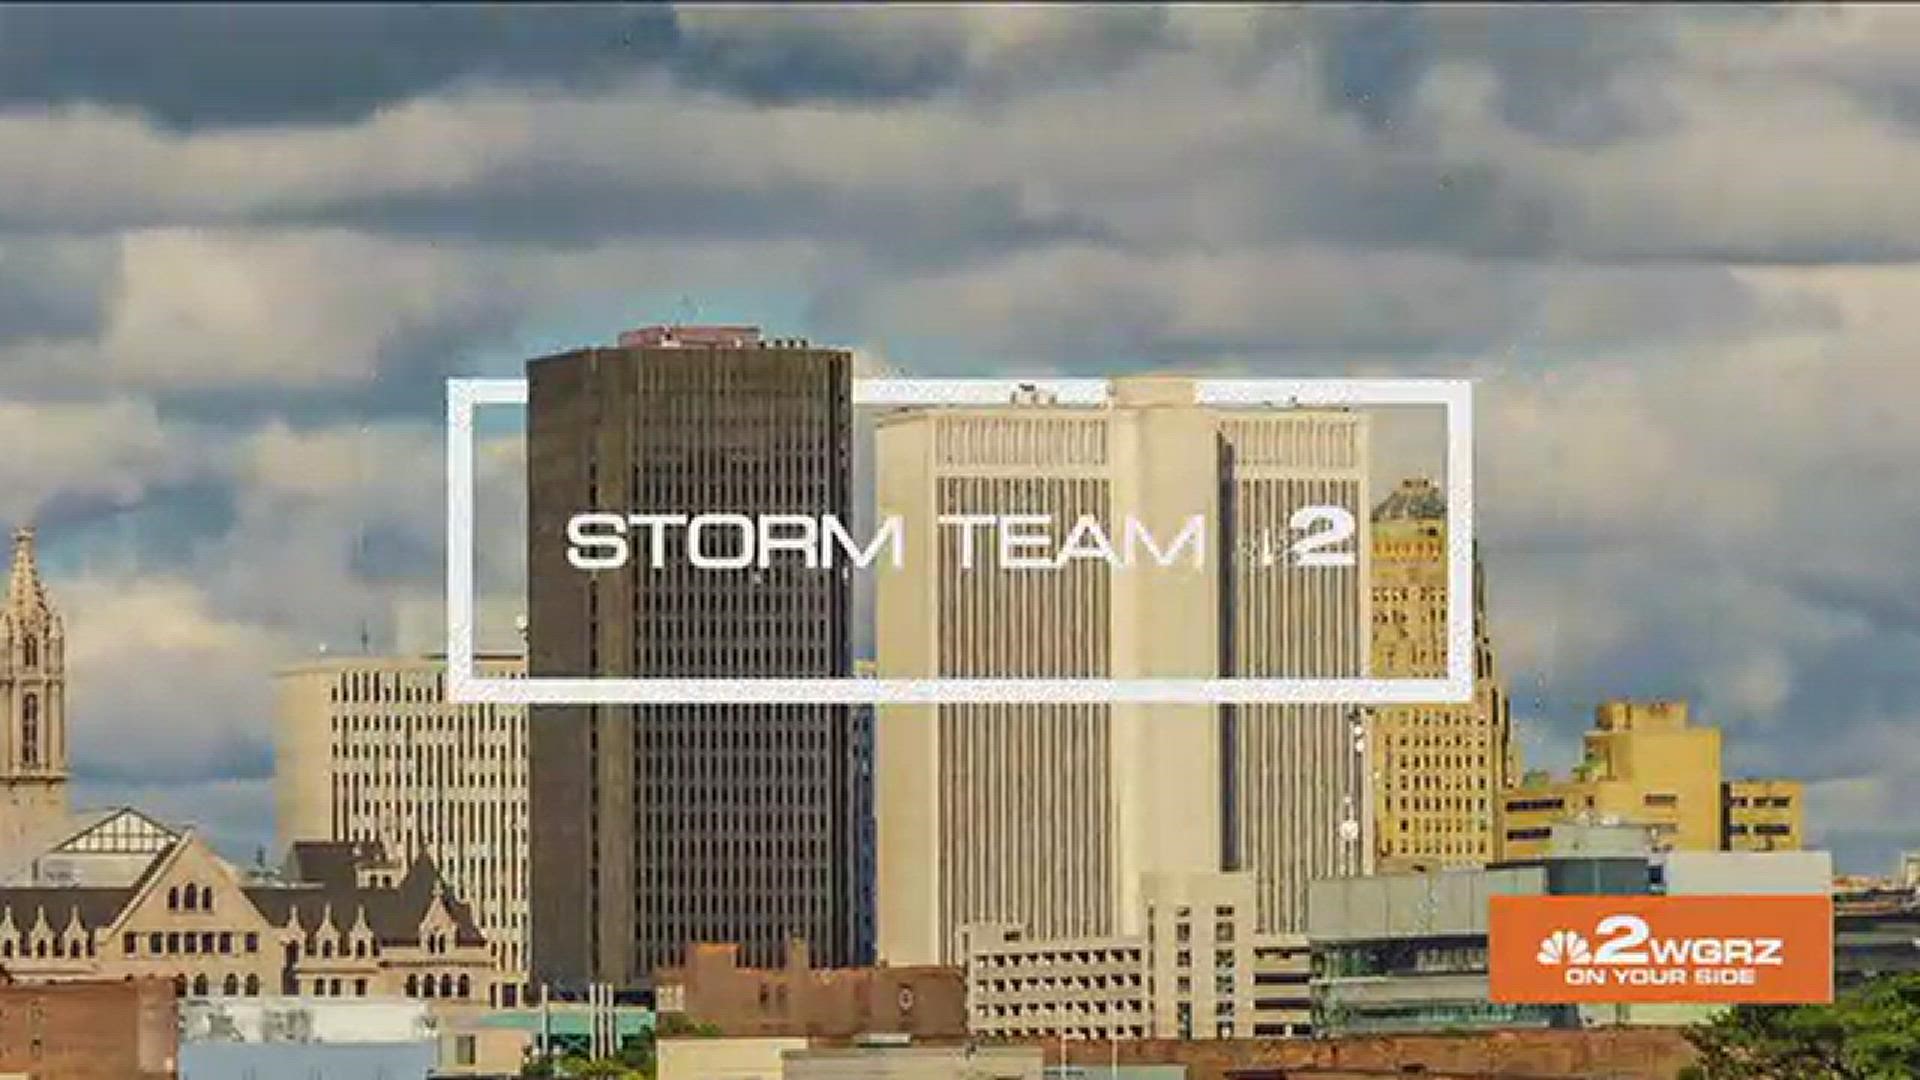 Storm Team 2's meteorologist Patrick Hammer has your latest weather forecast.